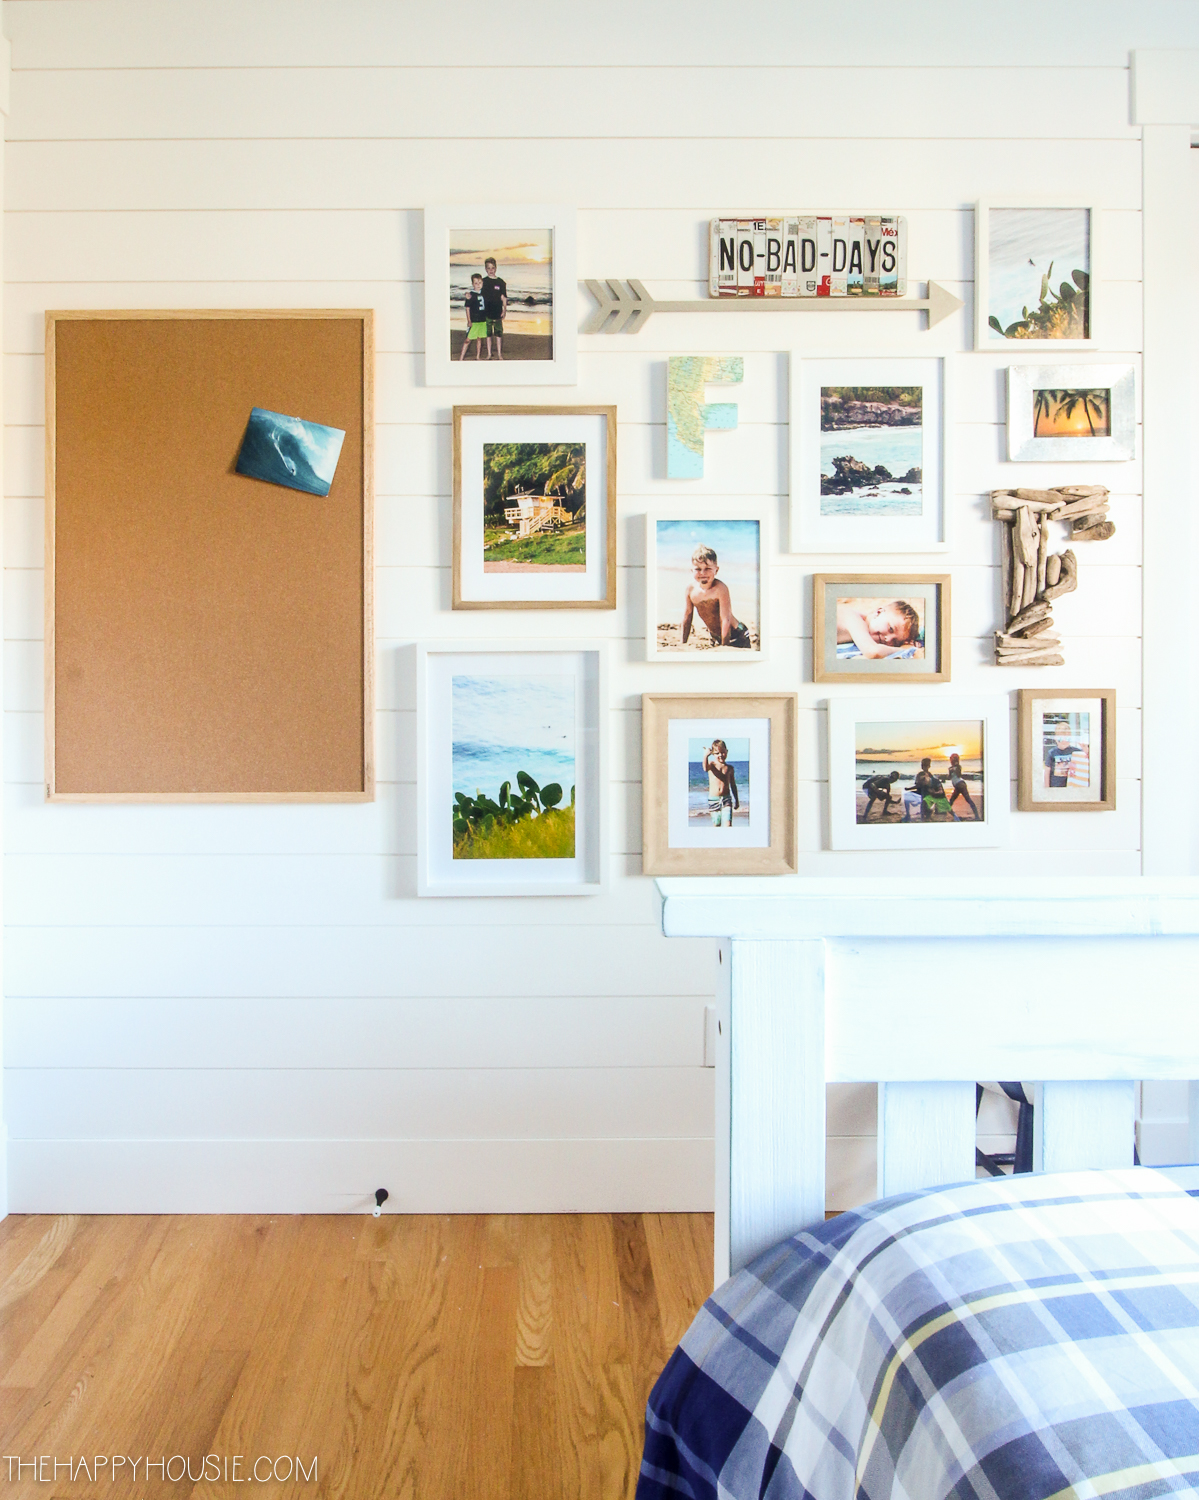 A picture gallery in a bedroom.